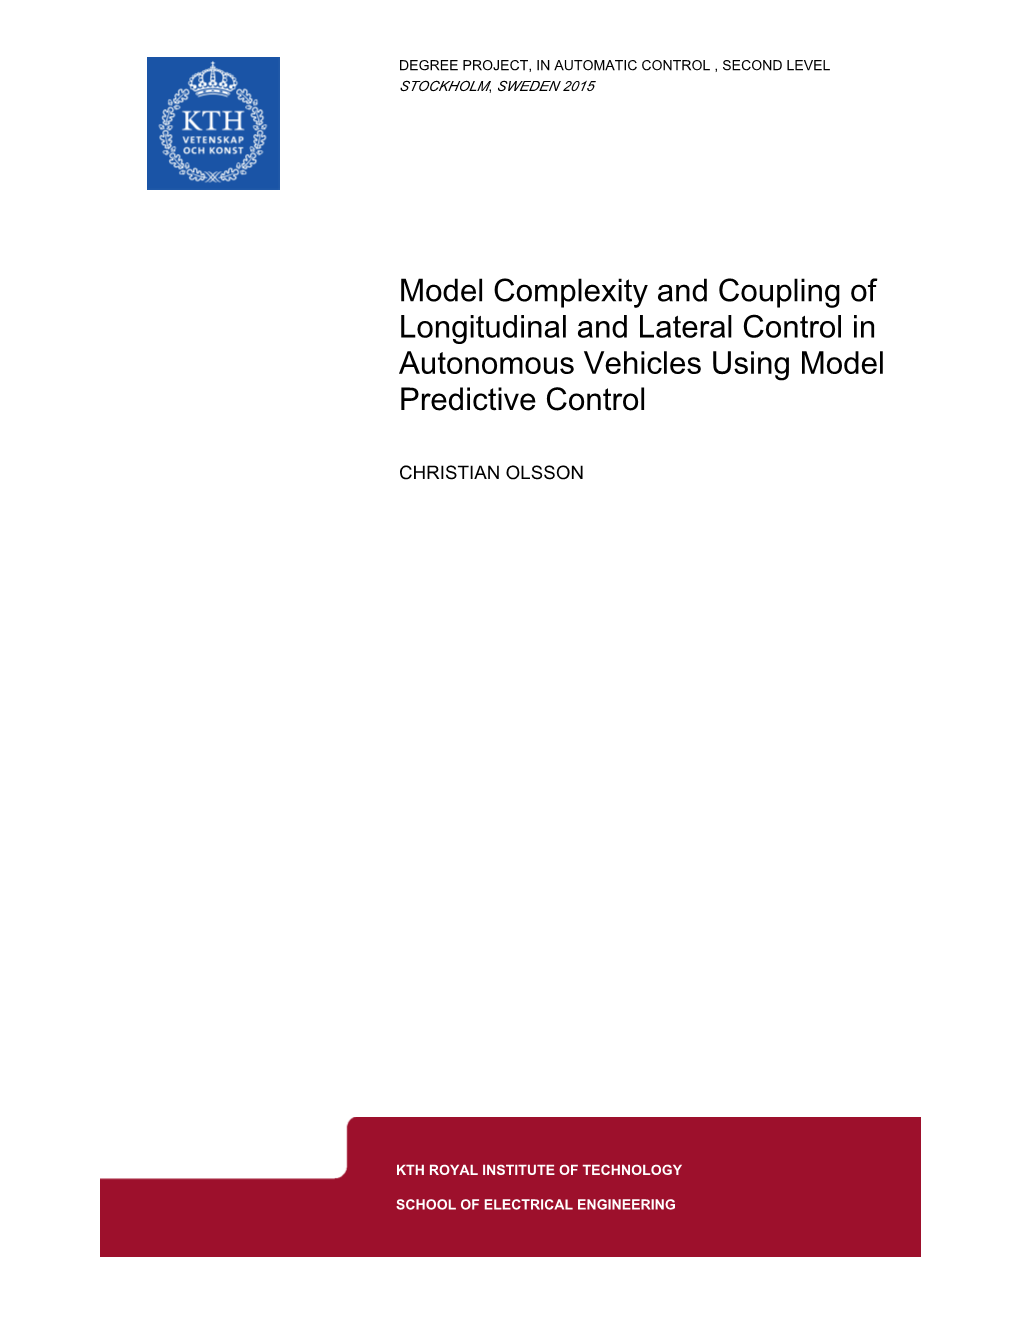 Model Complexity and Coupling of Longitudinal and Lateral Control in Autonomous Vehicles Using Model Predictive Control